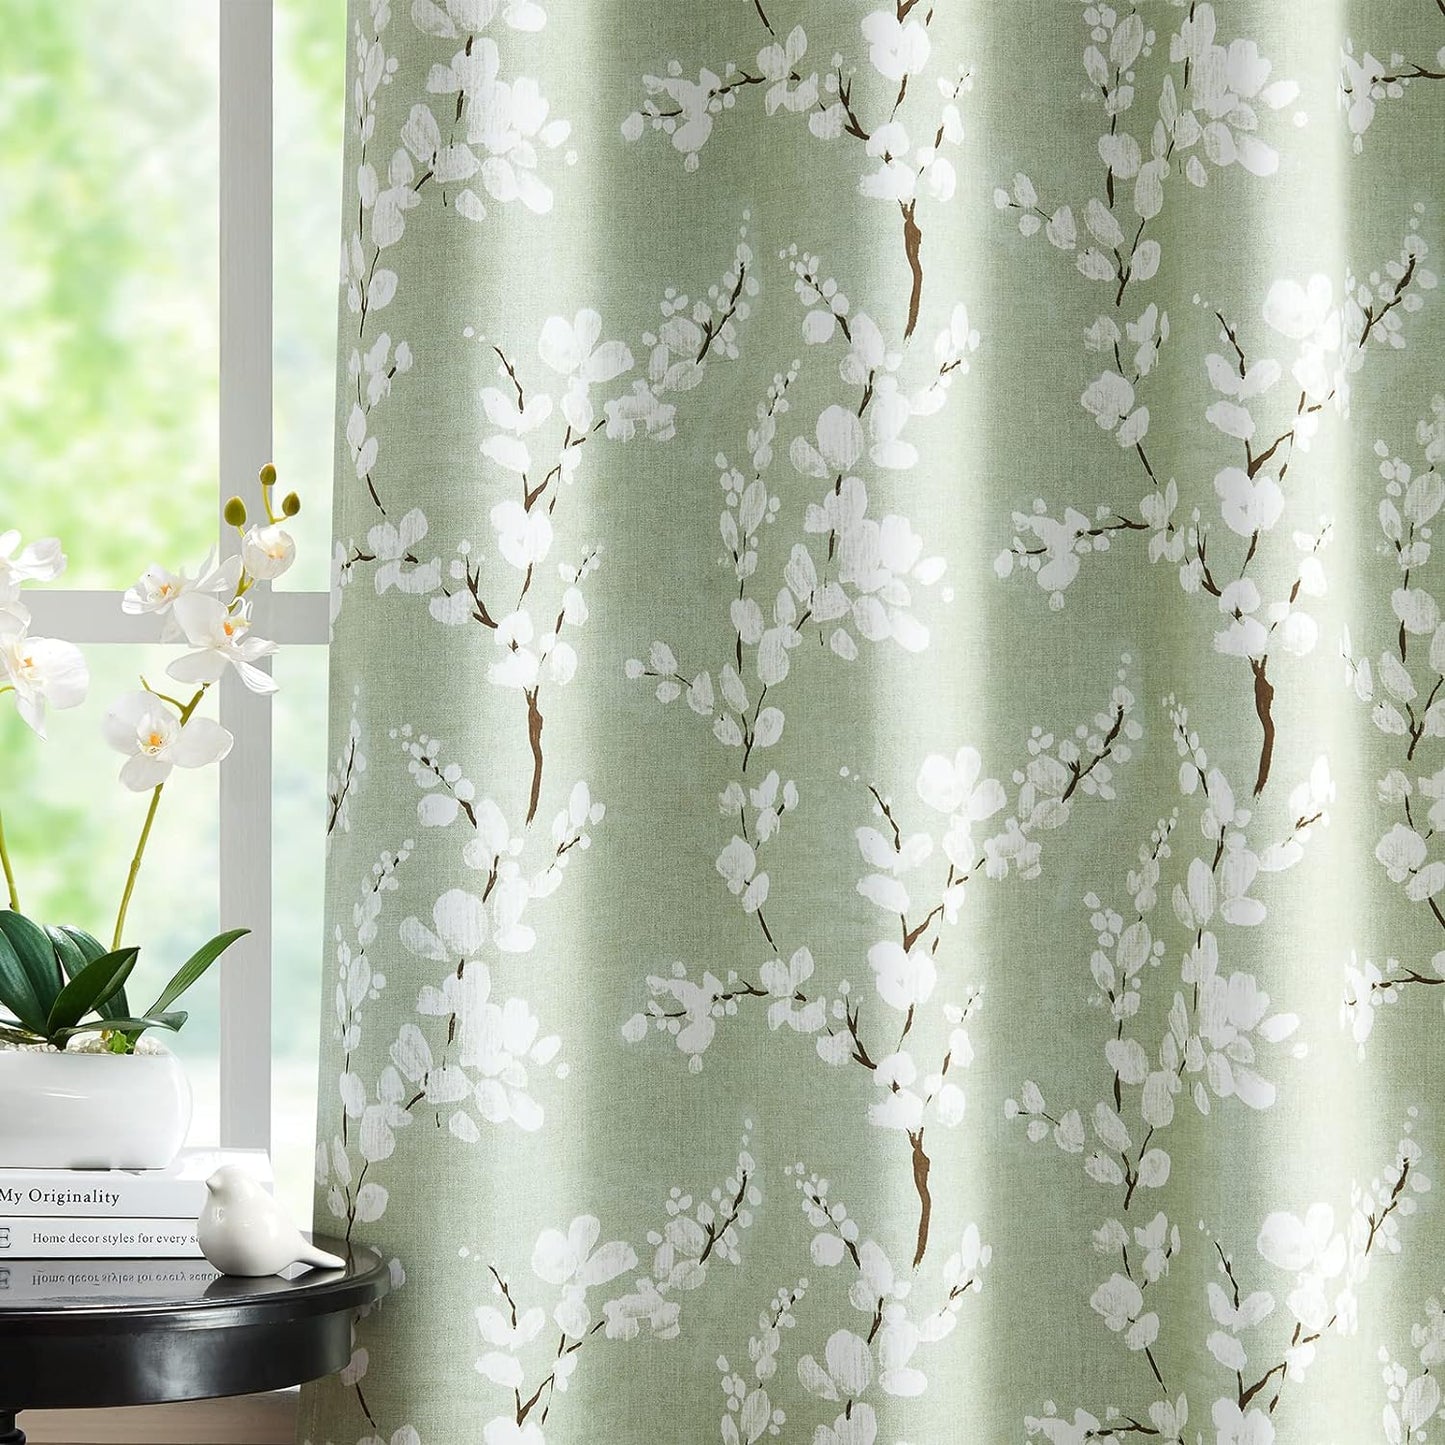 White Grey Blackout Curtains for Bedroom 84 Inch Length Floral Printed Living Room Curtain Panels for Farmhouse Décor Blossom Thermal Energy Efficient Light Blocking Window Curtain 50"W 2Pcs  Fmfunctex Blossom/ Green 50"W X 63"L 2Pcs 